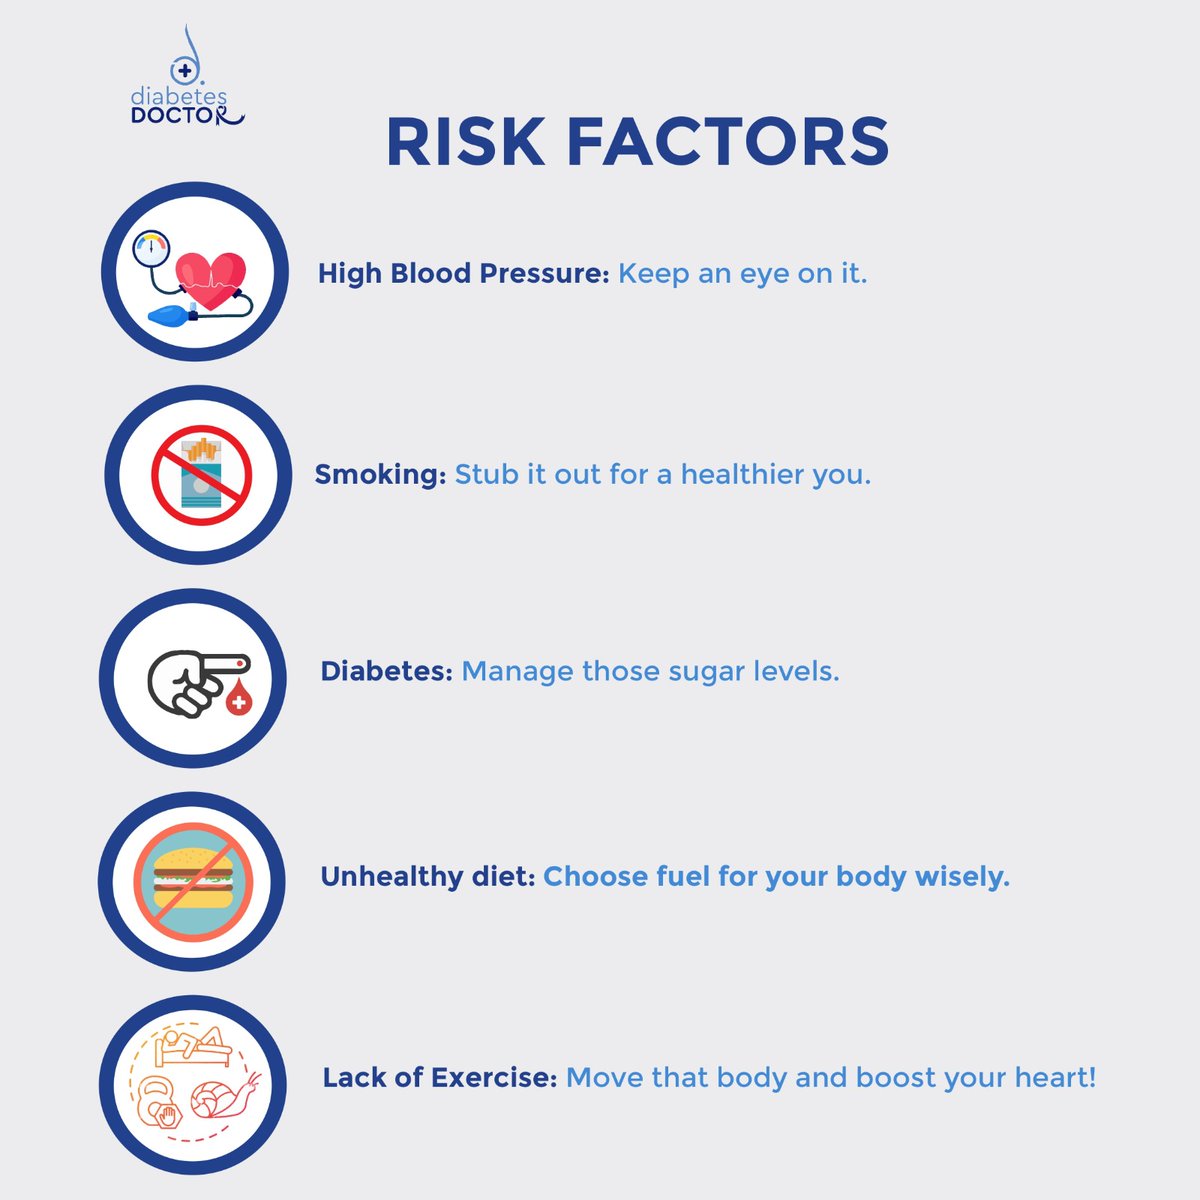 Know the signs, save a life! Did you know strokes come in different types, each with its own set of risk factors? Stay informed, stay empowered. #StrokeAwareness #KnowTheSigns